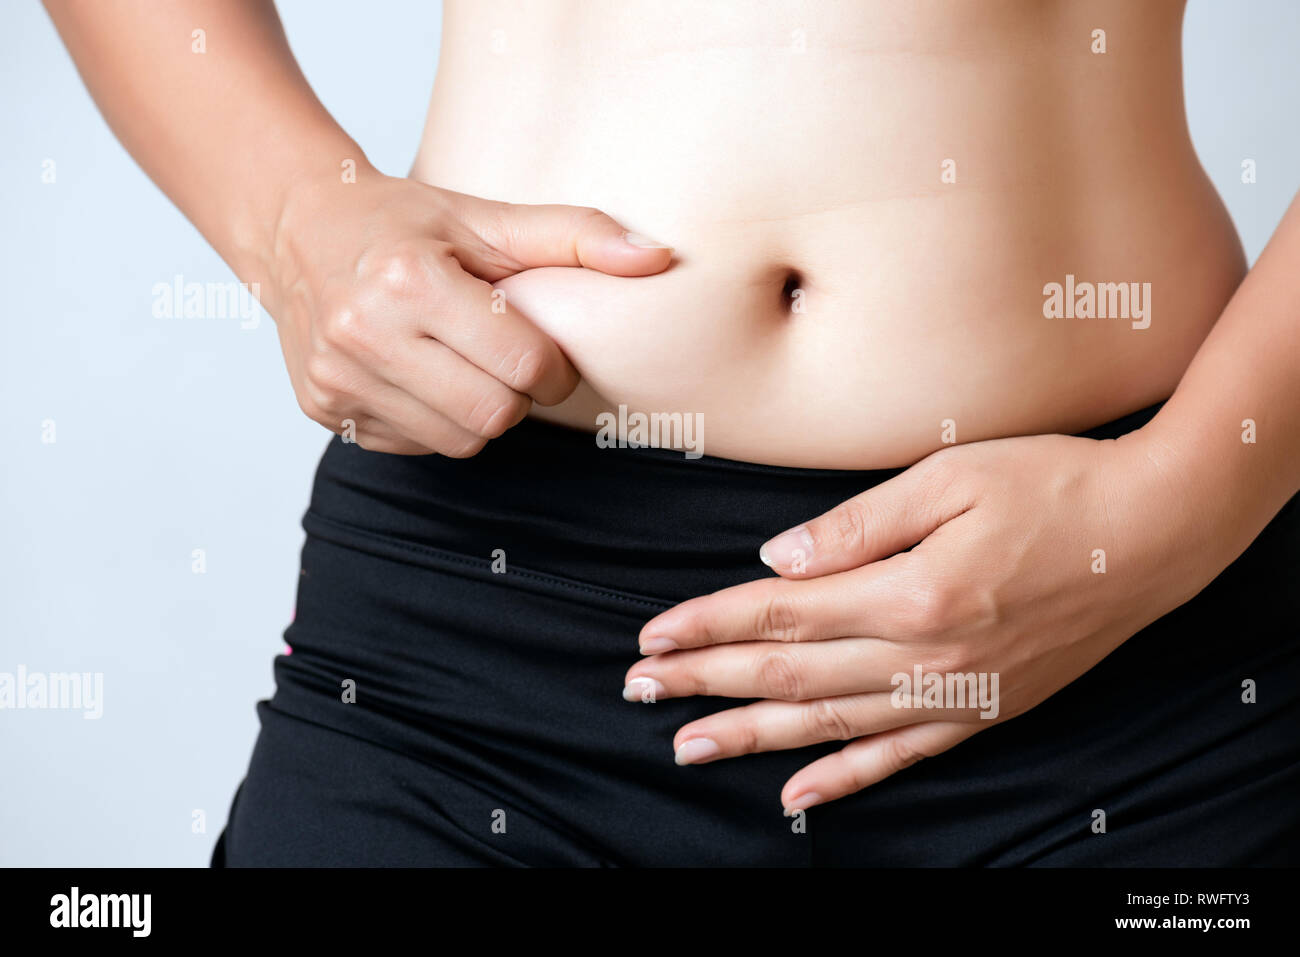 Overweight Woman With Big Belly Stock Photo, Picture and Royalty